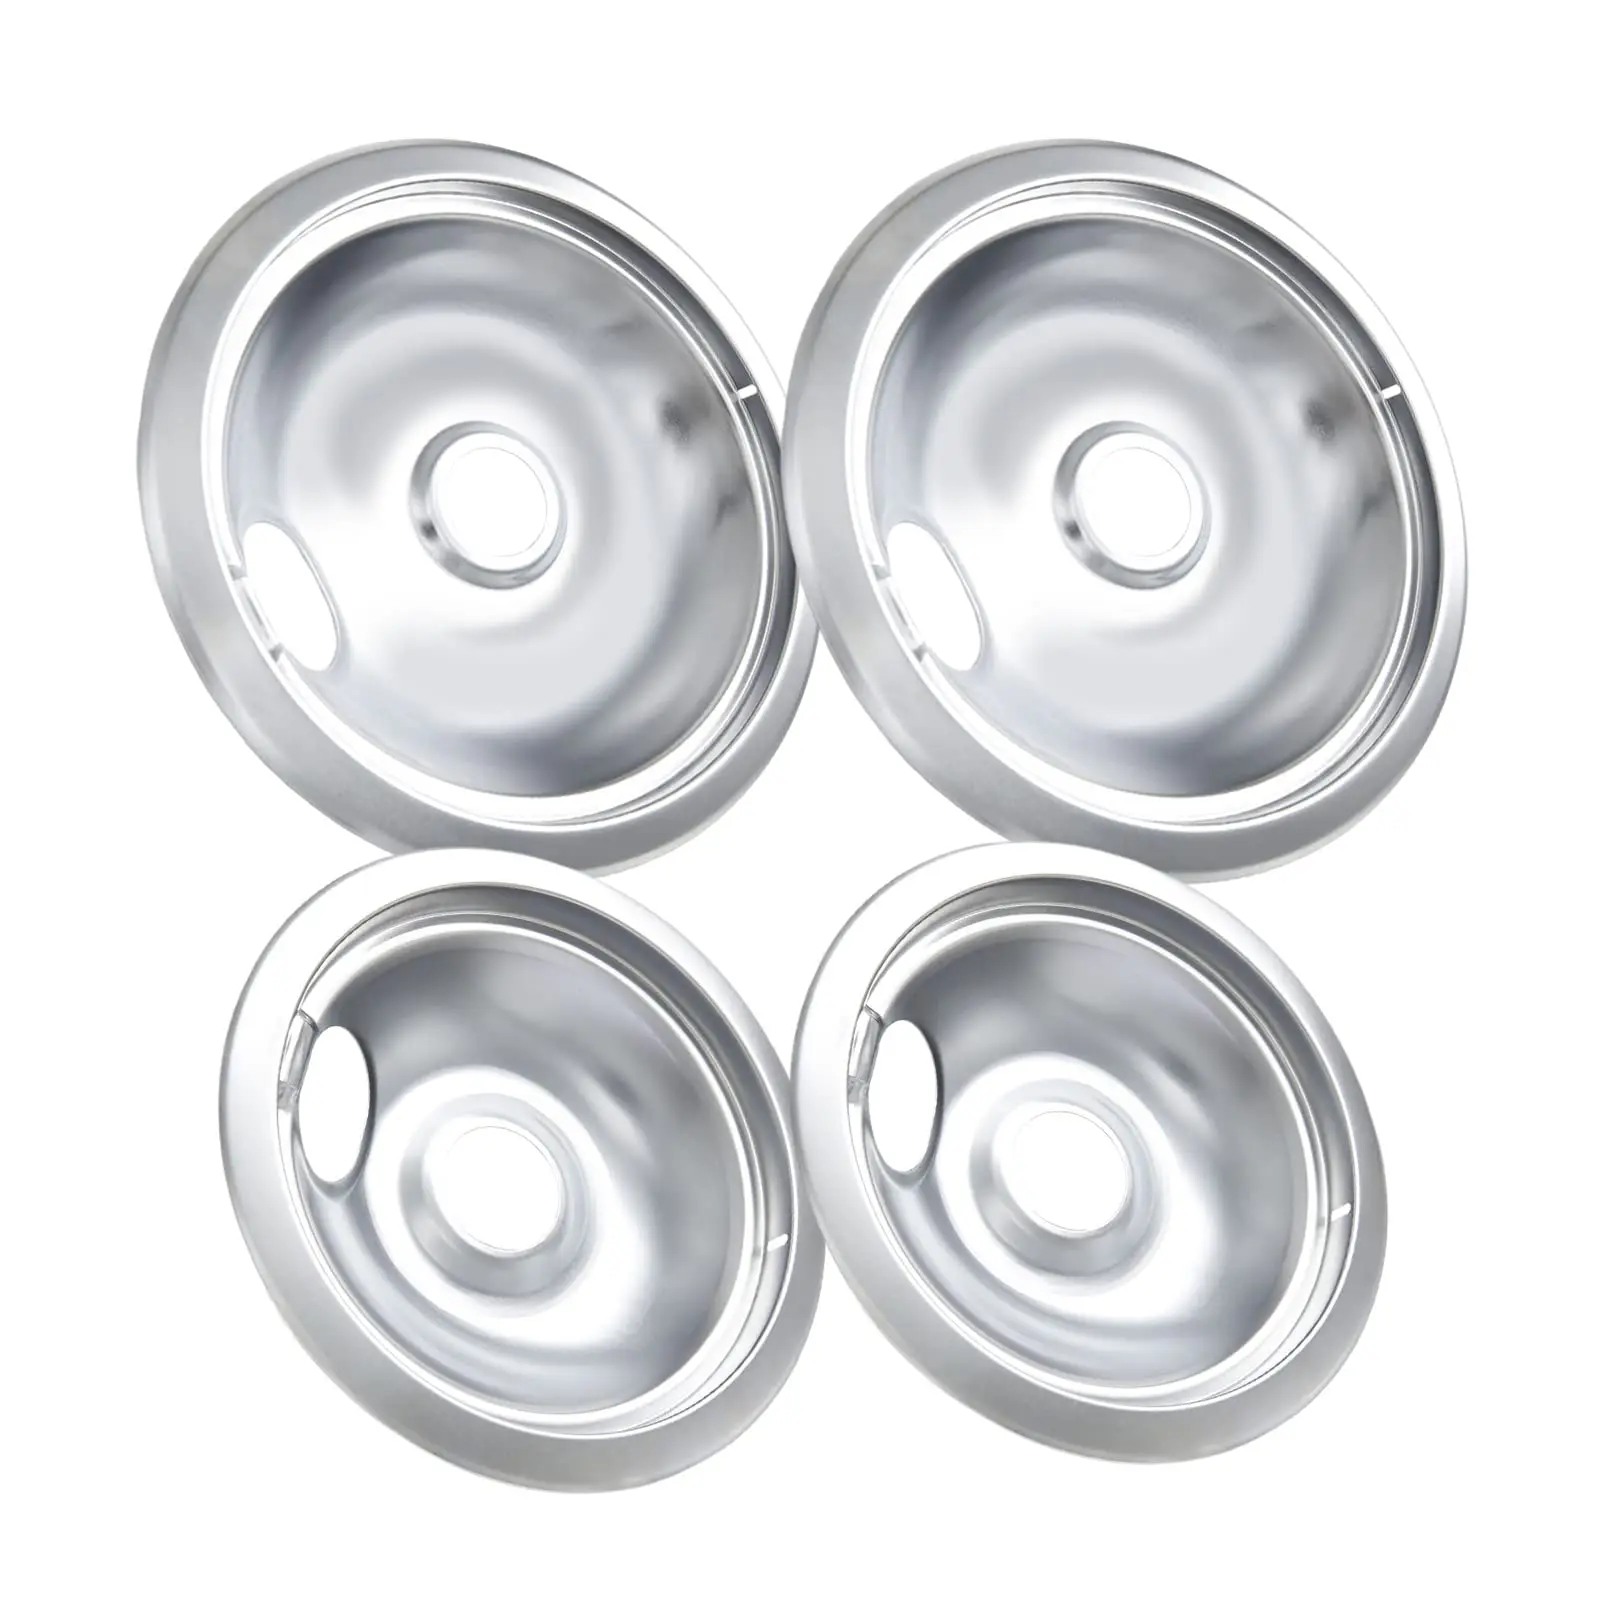 

Round Hob Cover Drip Oil Filter Tray Stove Burner Drip Pans for Electric Stove Top Thickening to Prevent Bending and Rust